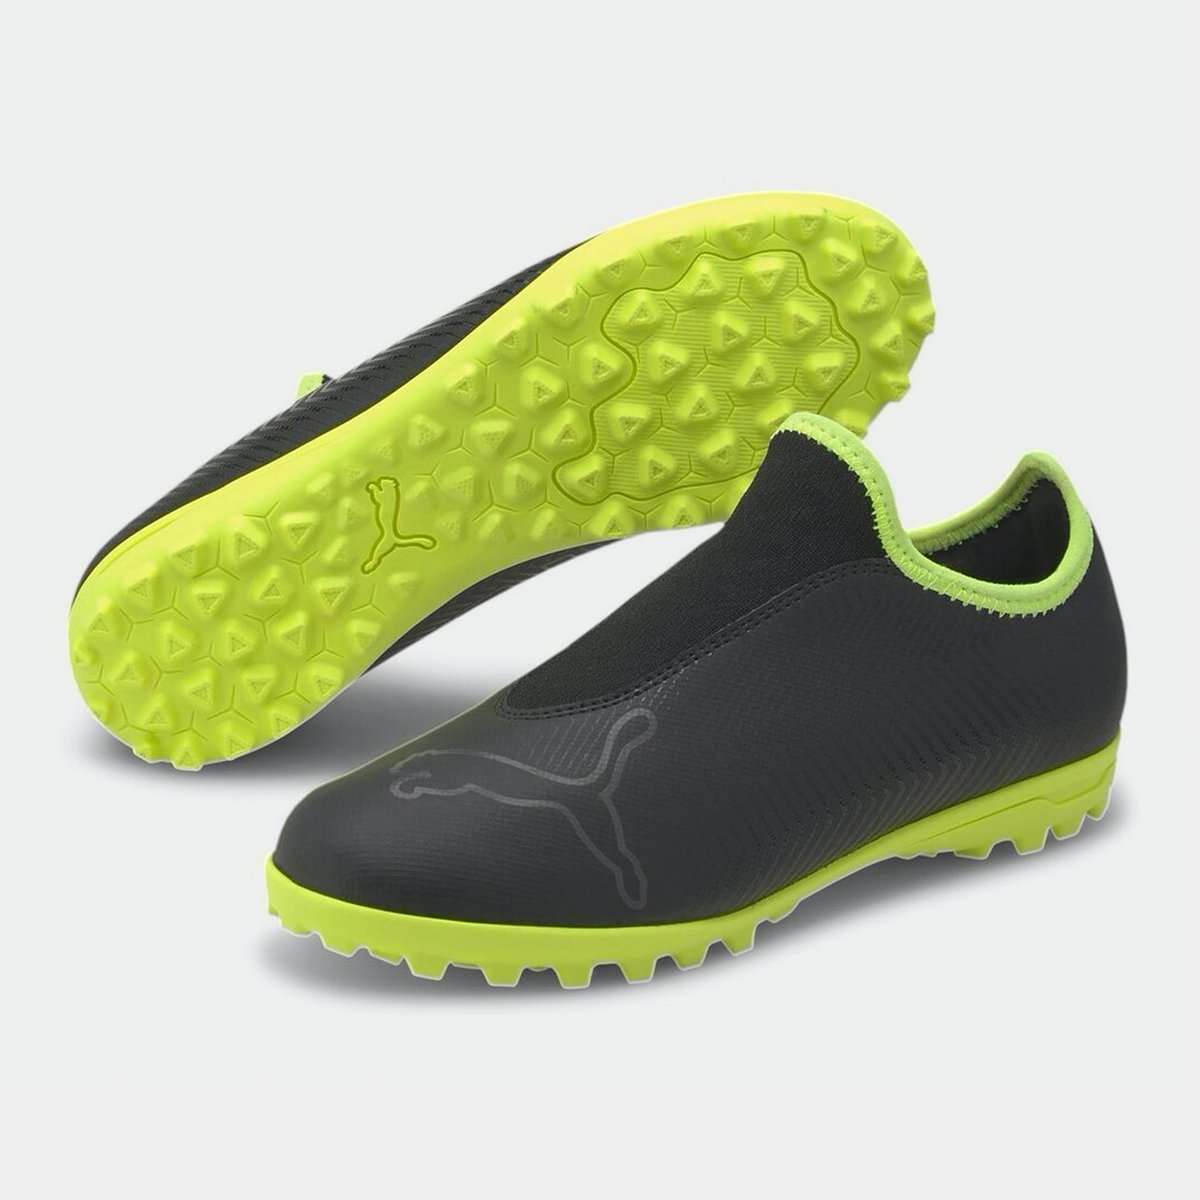 Astro Turf Football Trainers - Lovell Sports